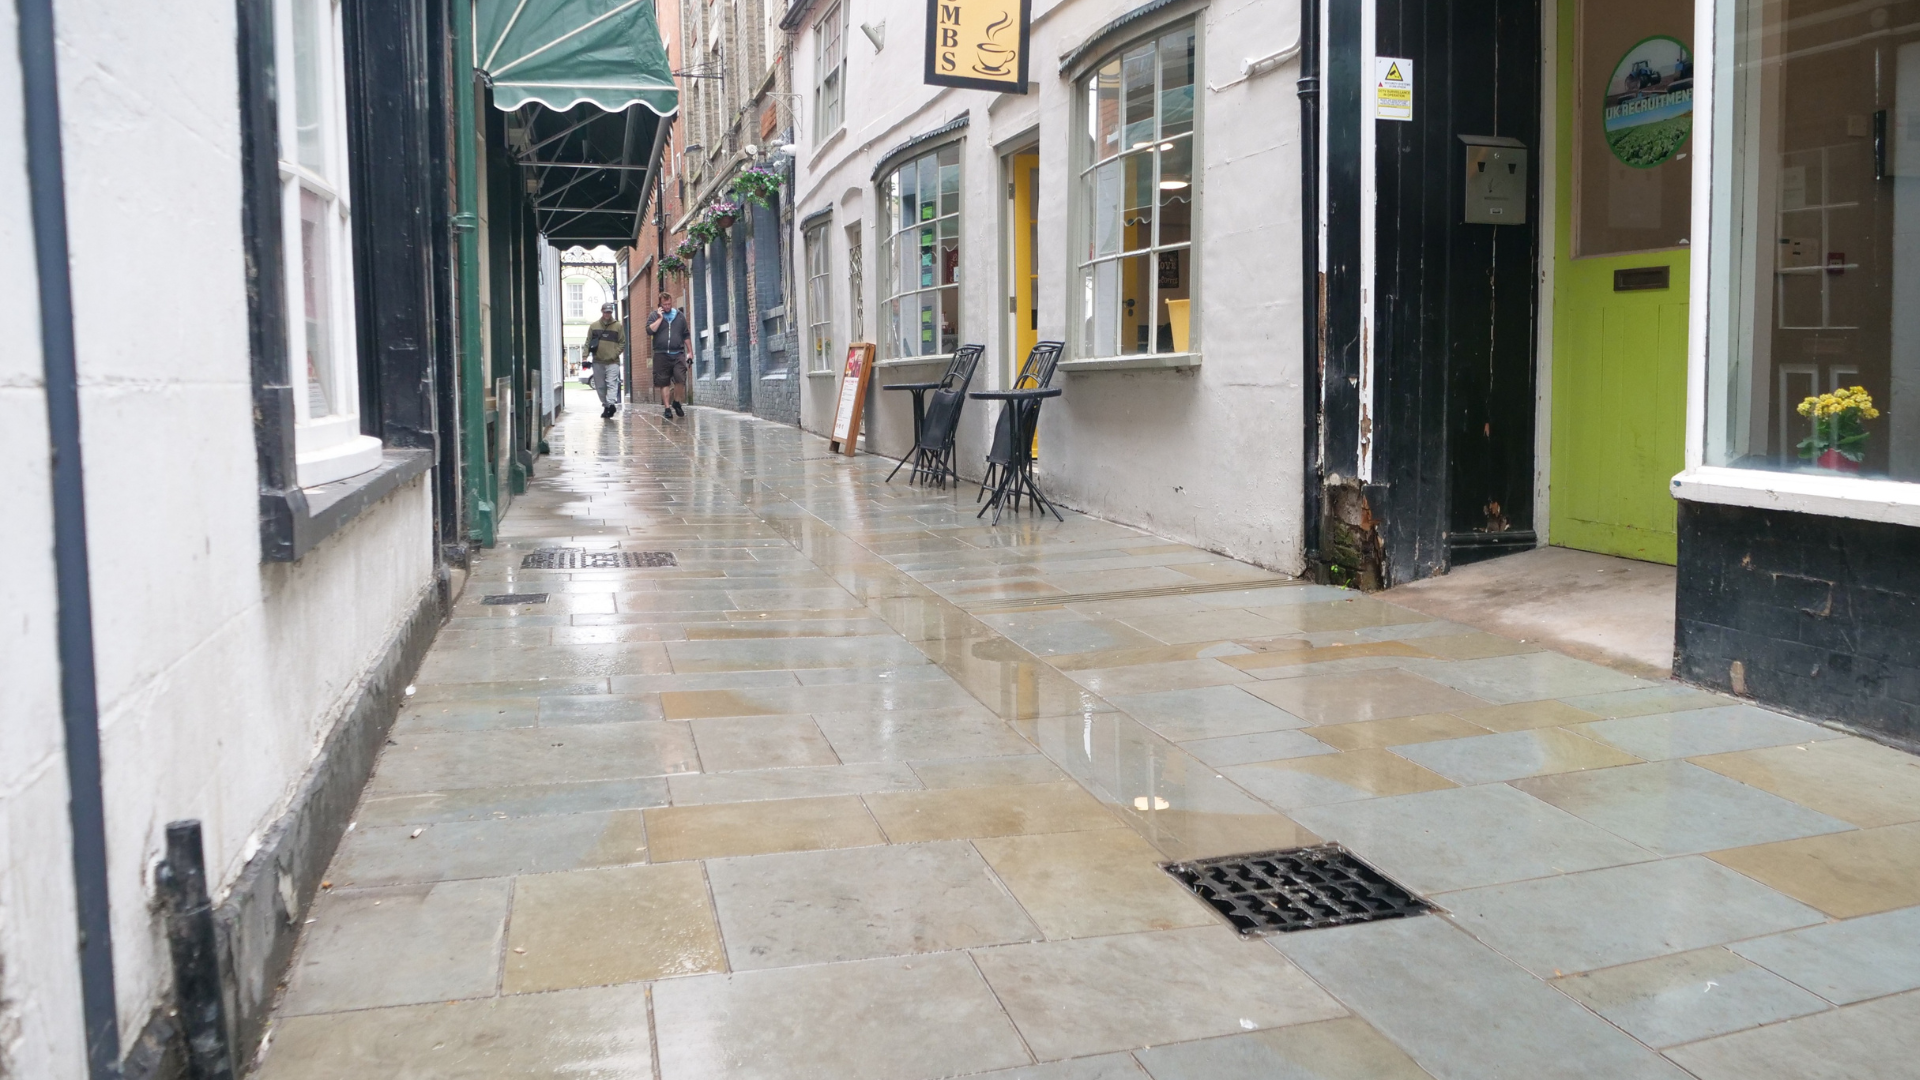 A view of the improvements to the paving stones at Dolphin Lane